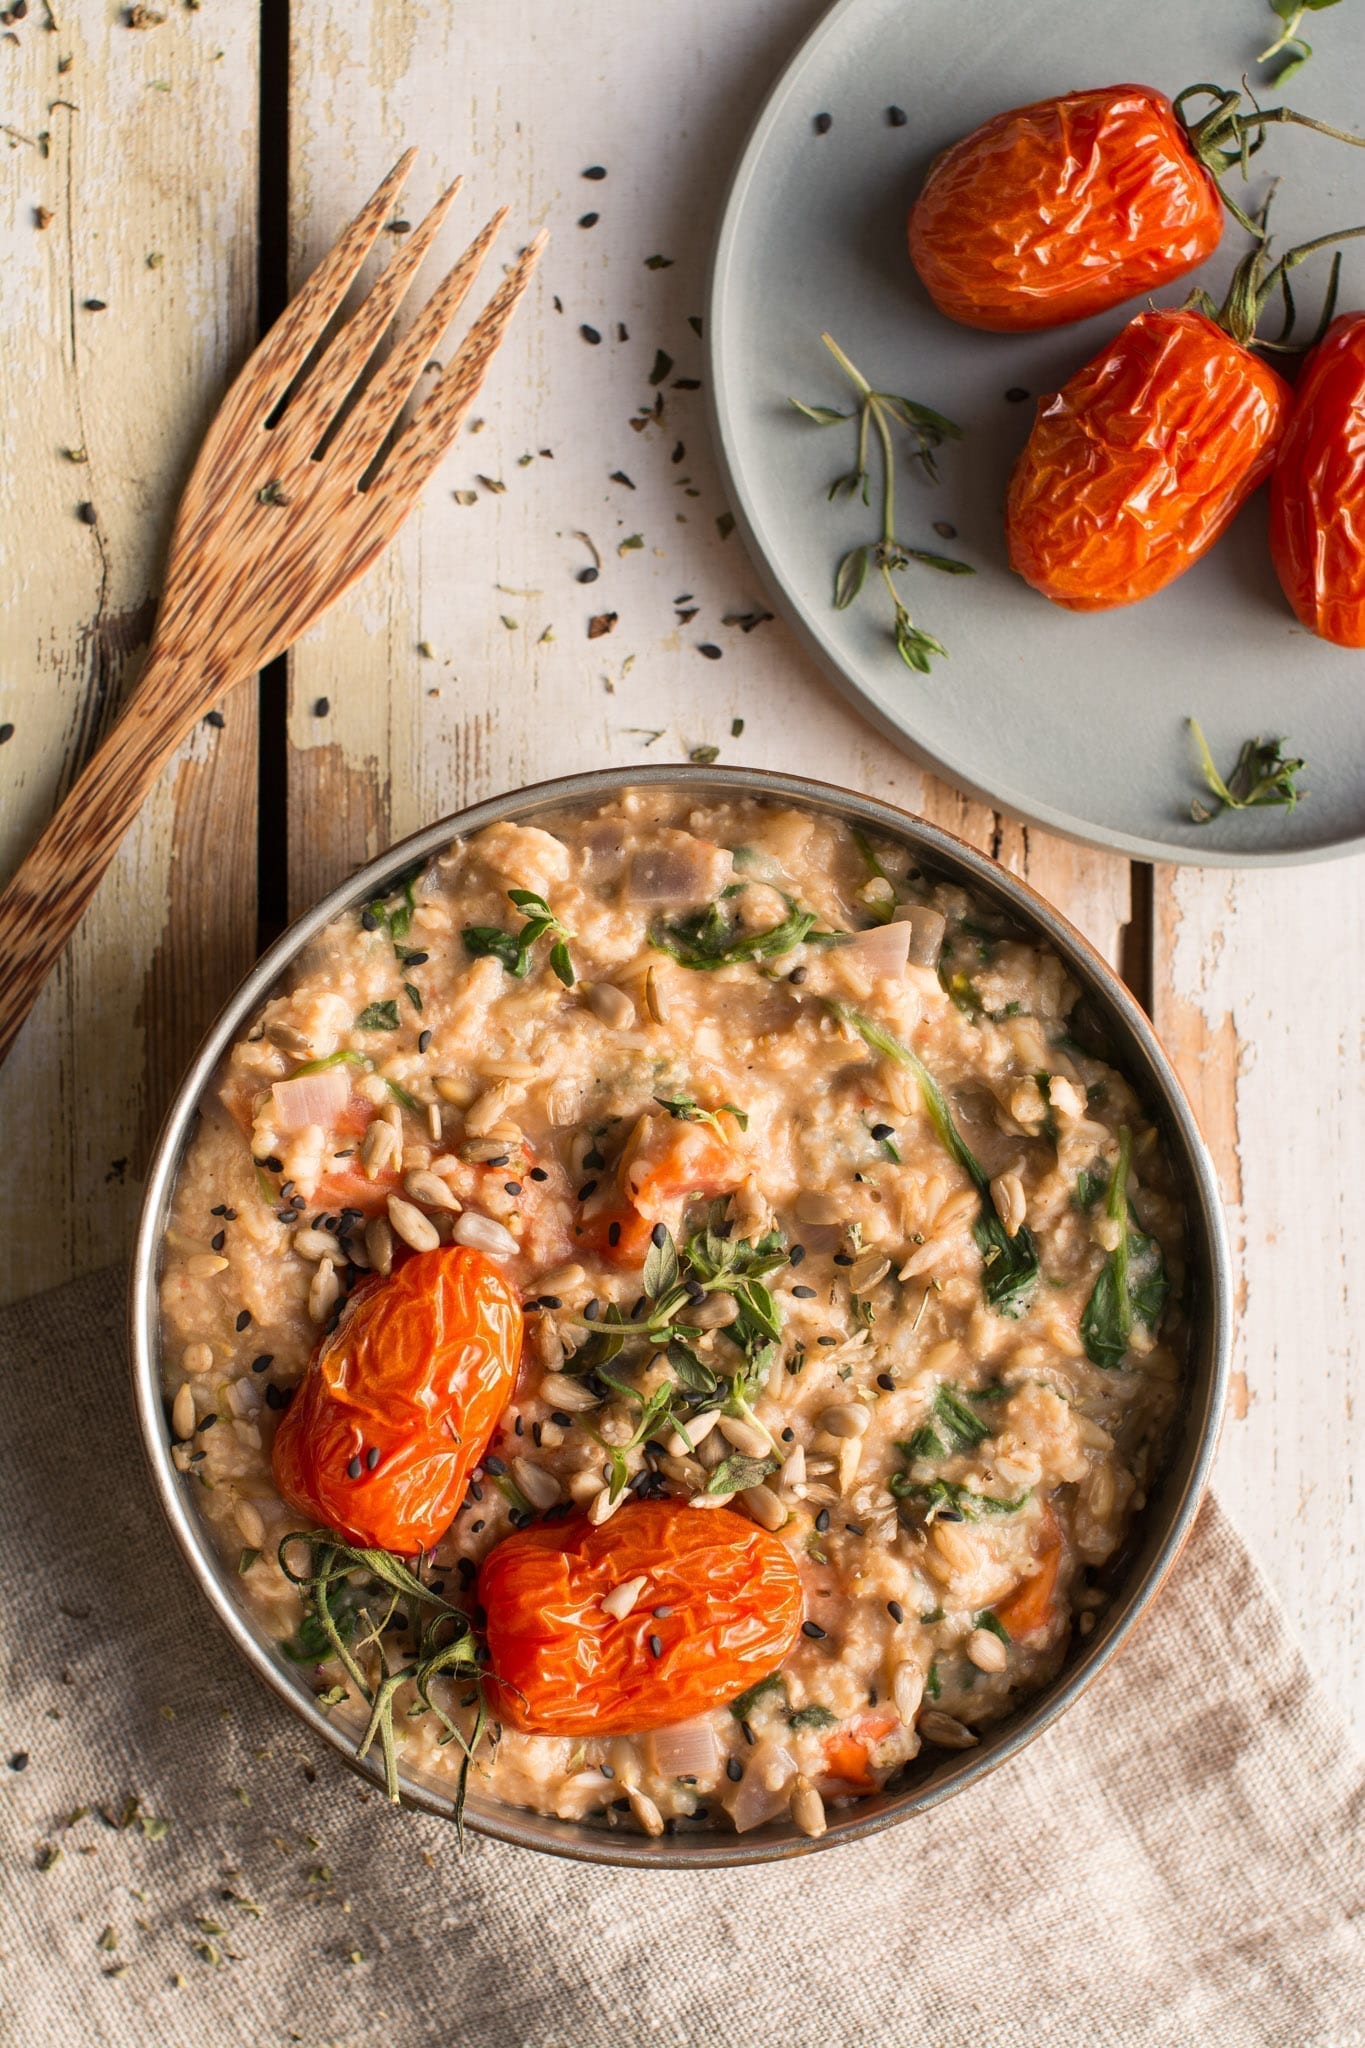 This delicious savory oatmeal is full of Mediterranean flavours and nutrients that your body will appreciate in the morning.